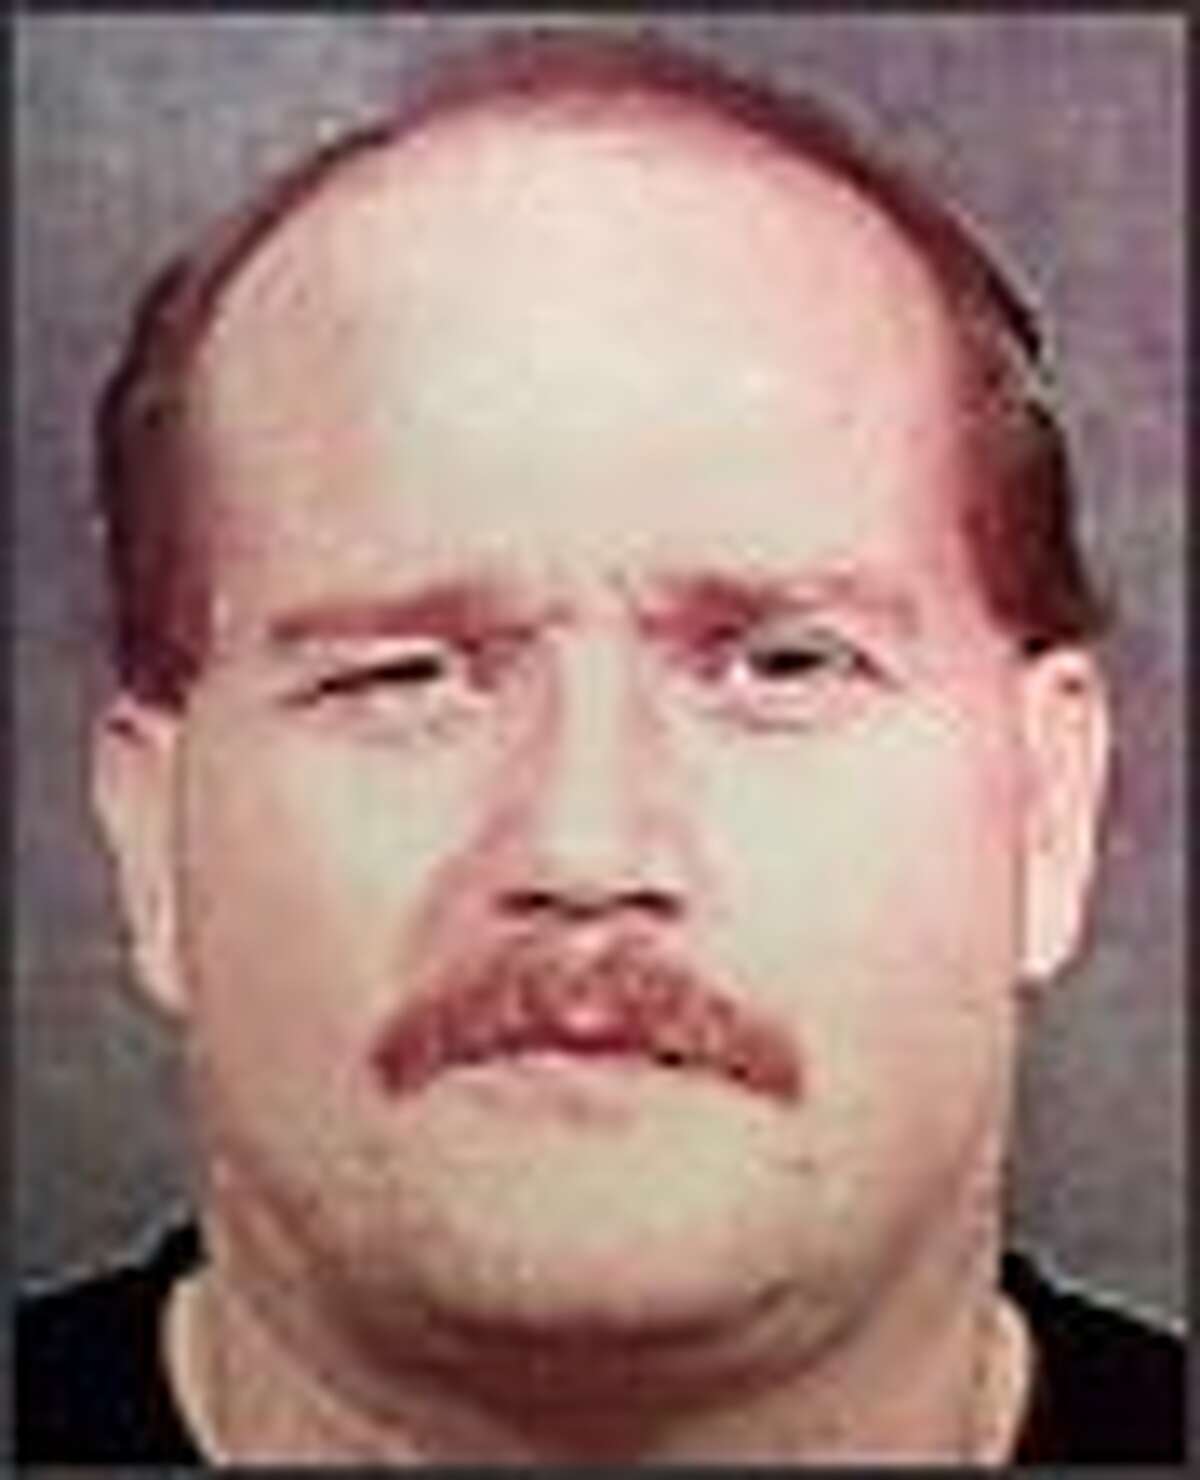 Buford Furrow Jr. is serving life in prison for the shooting spree.